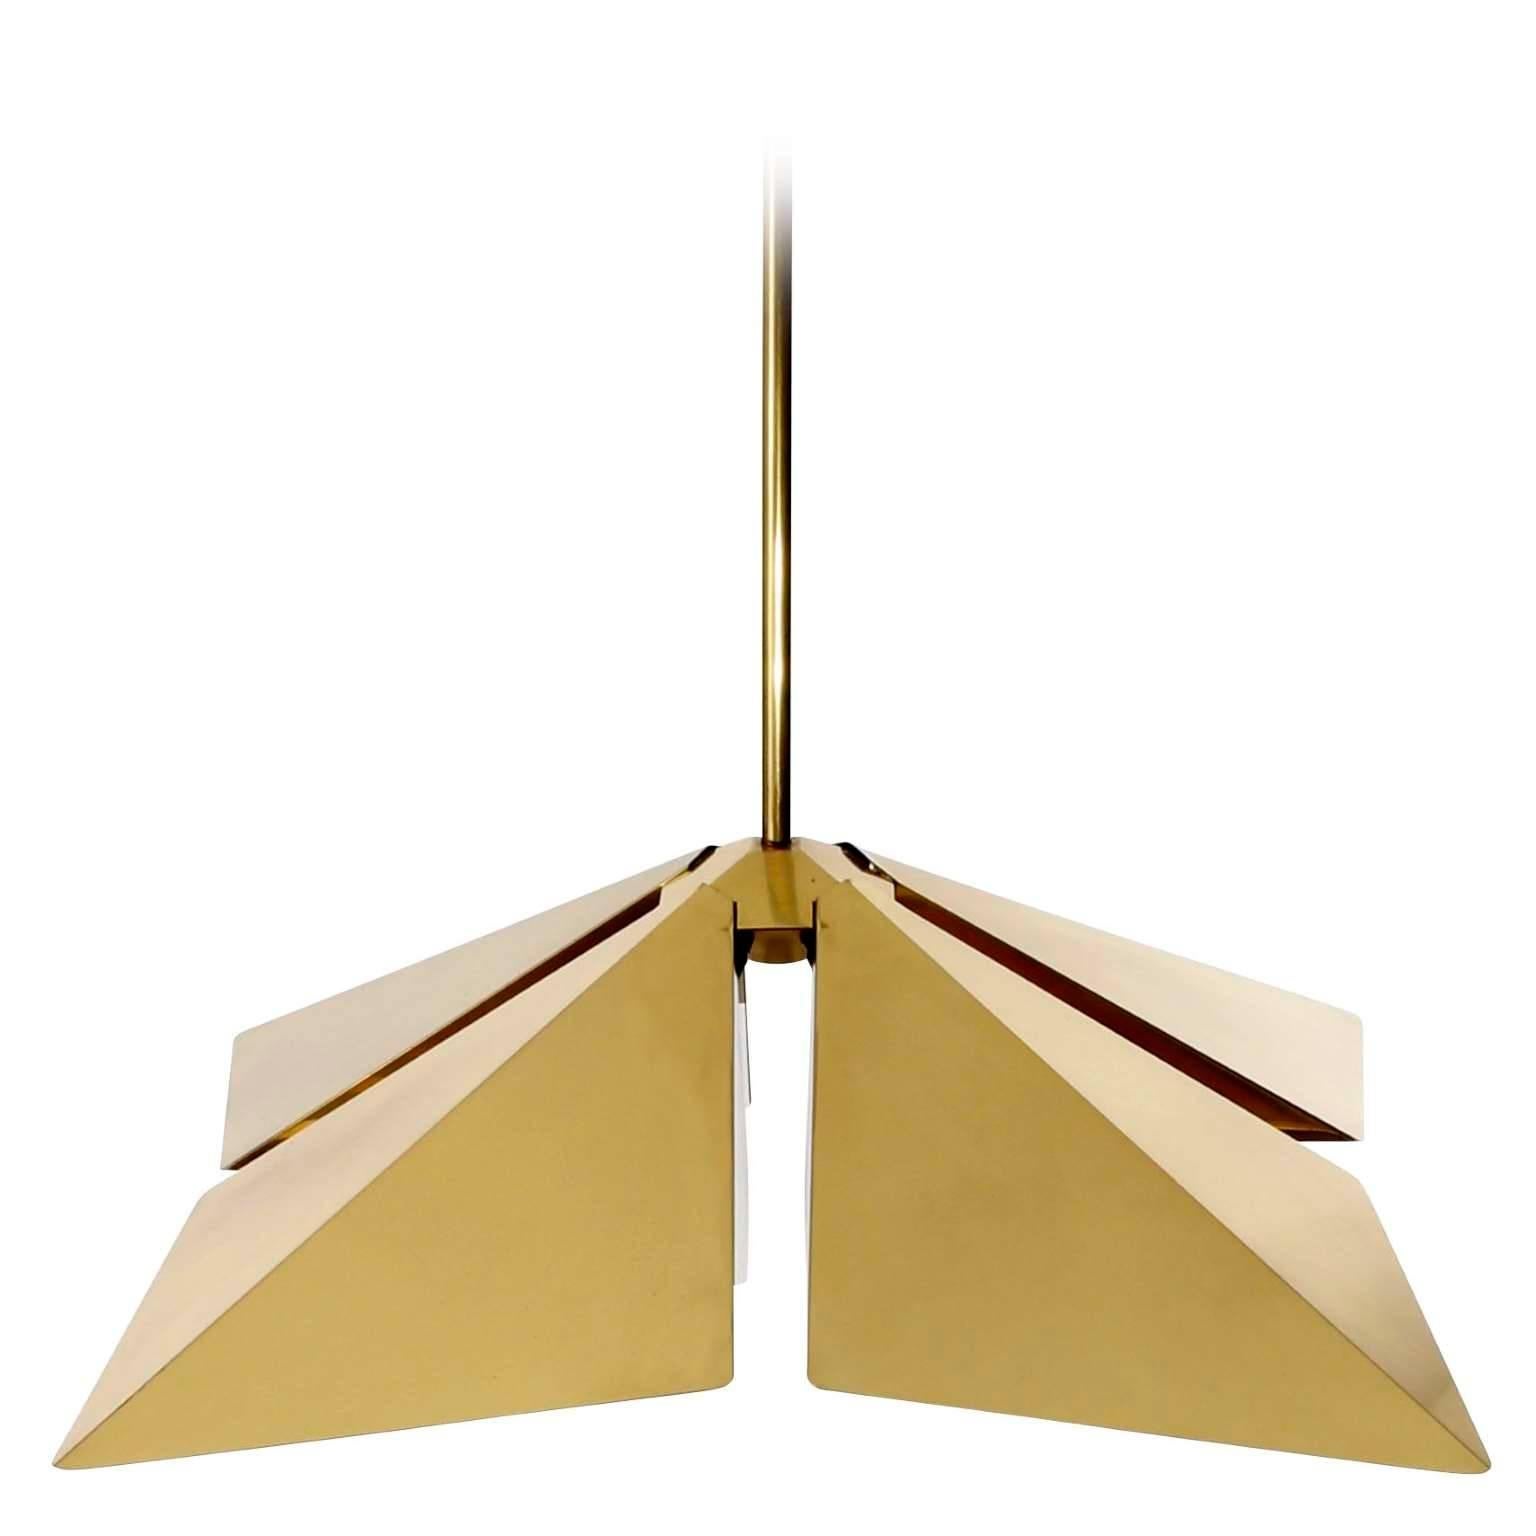 A square brass pendant light fixture manufactured by Vereinigte Werkstätten Munich, Germany, in Mid-Century, circa 1970 (late 1960s or early 1970s).
This gorgeous fixture is made of solid polished brass which has an aged surface in a rich and warm